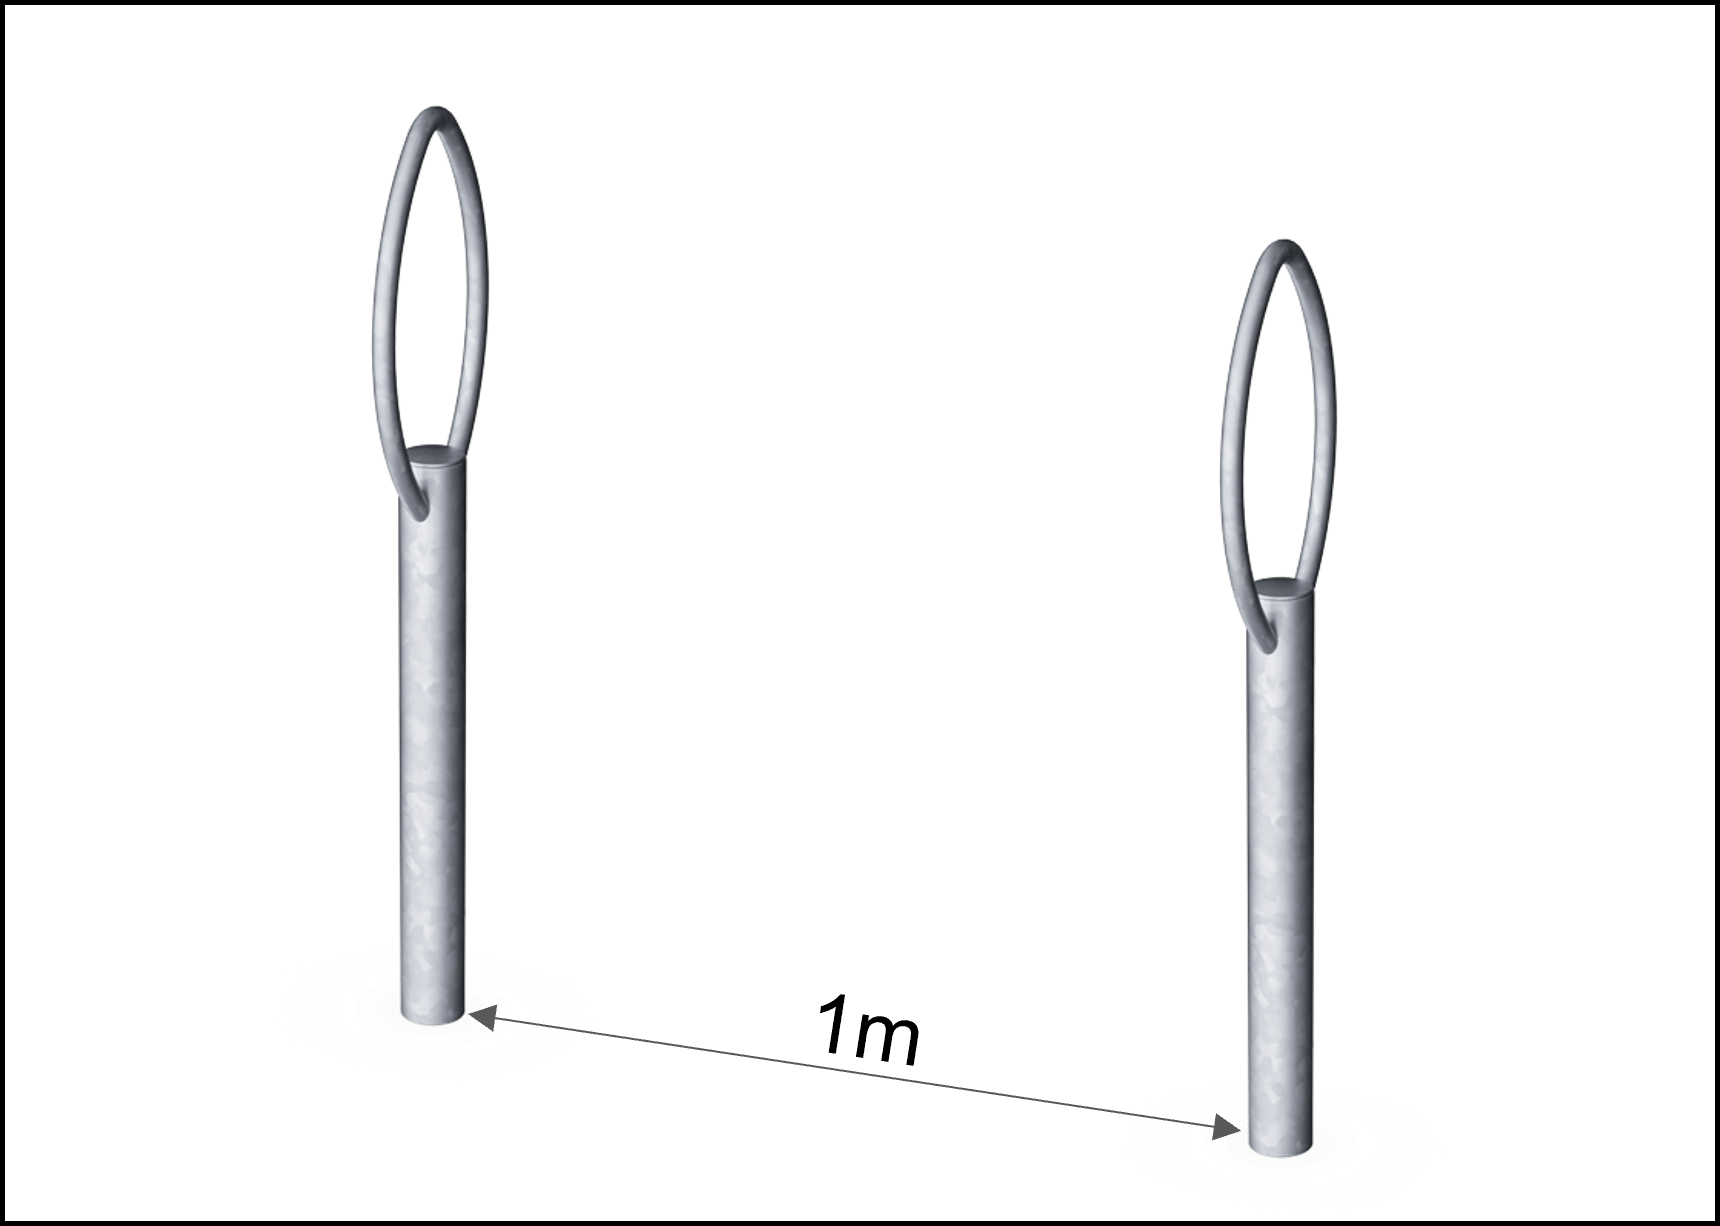 PAR_Bicycle stand capacity